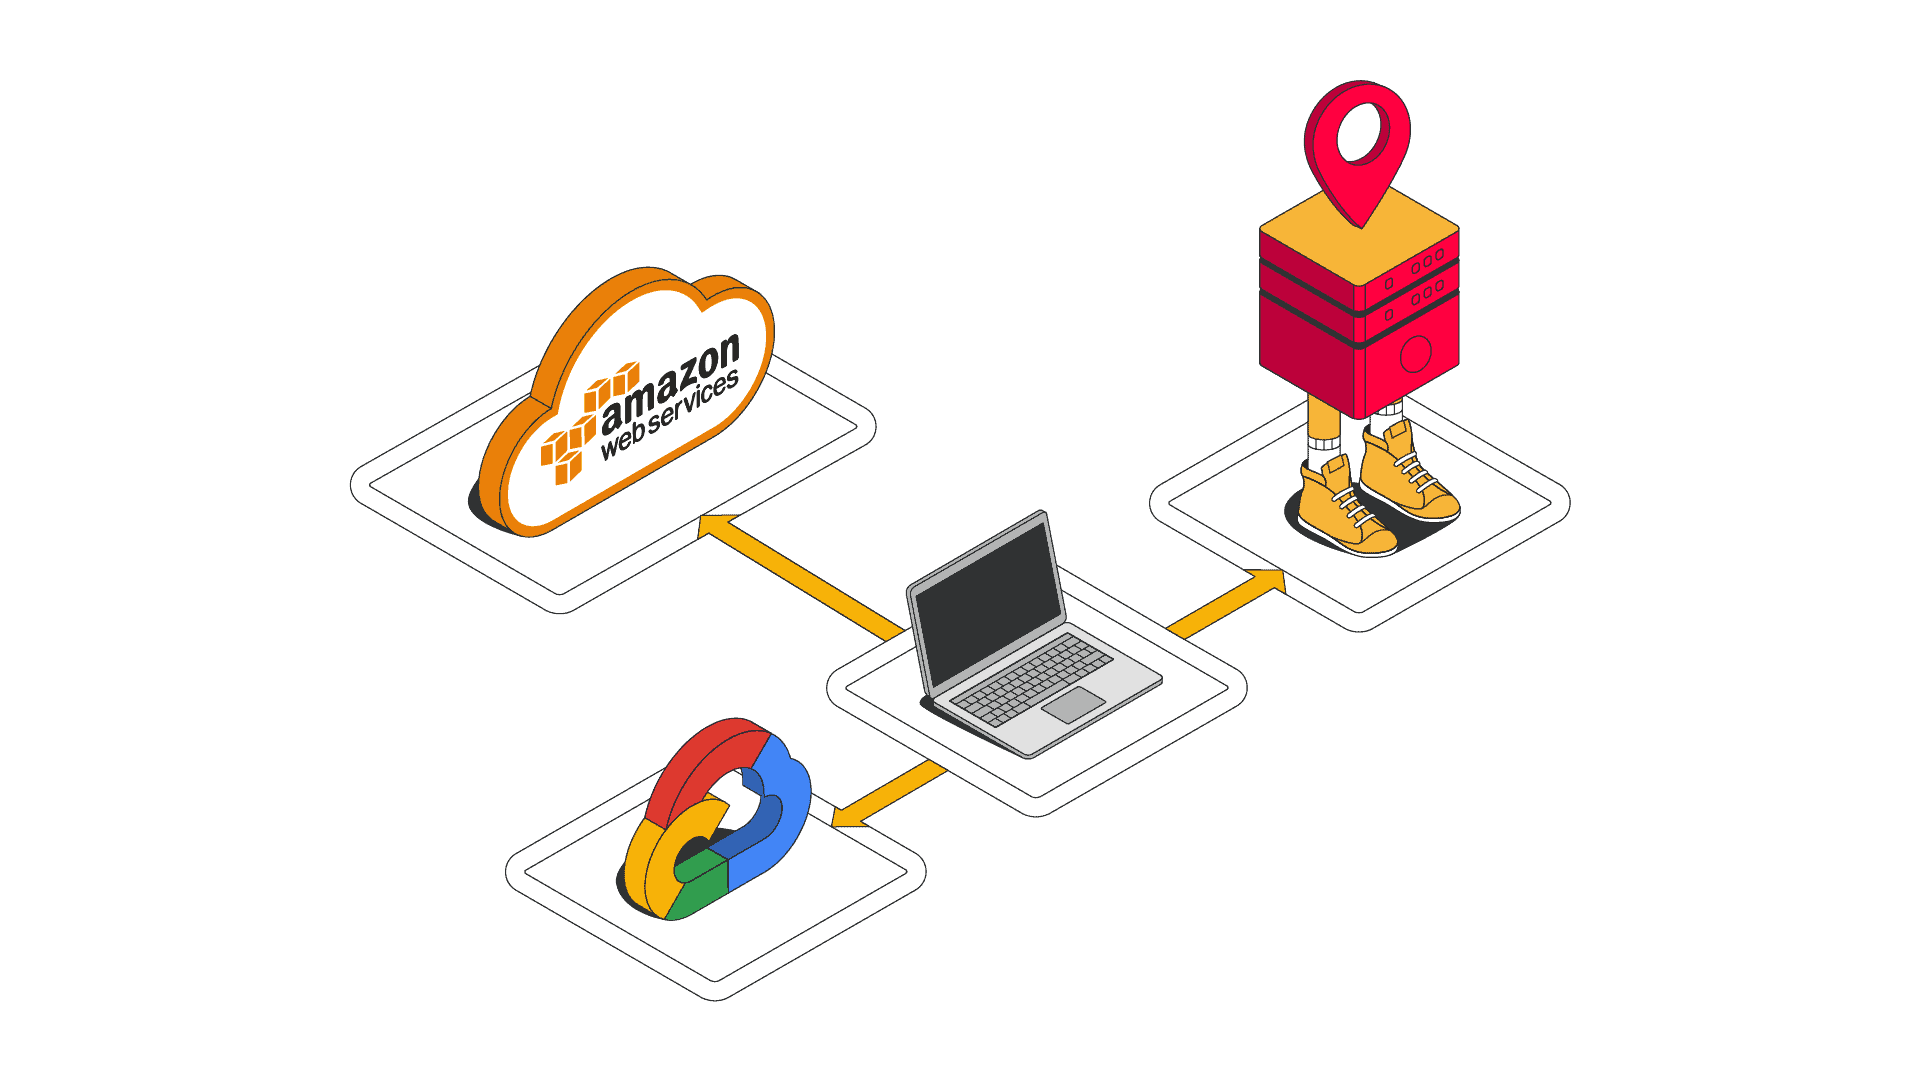 a laptop pointing at a sneaker server, icon of google cloud, and icon of amazon web services